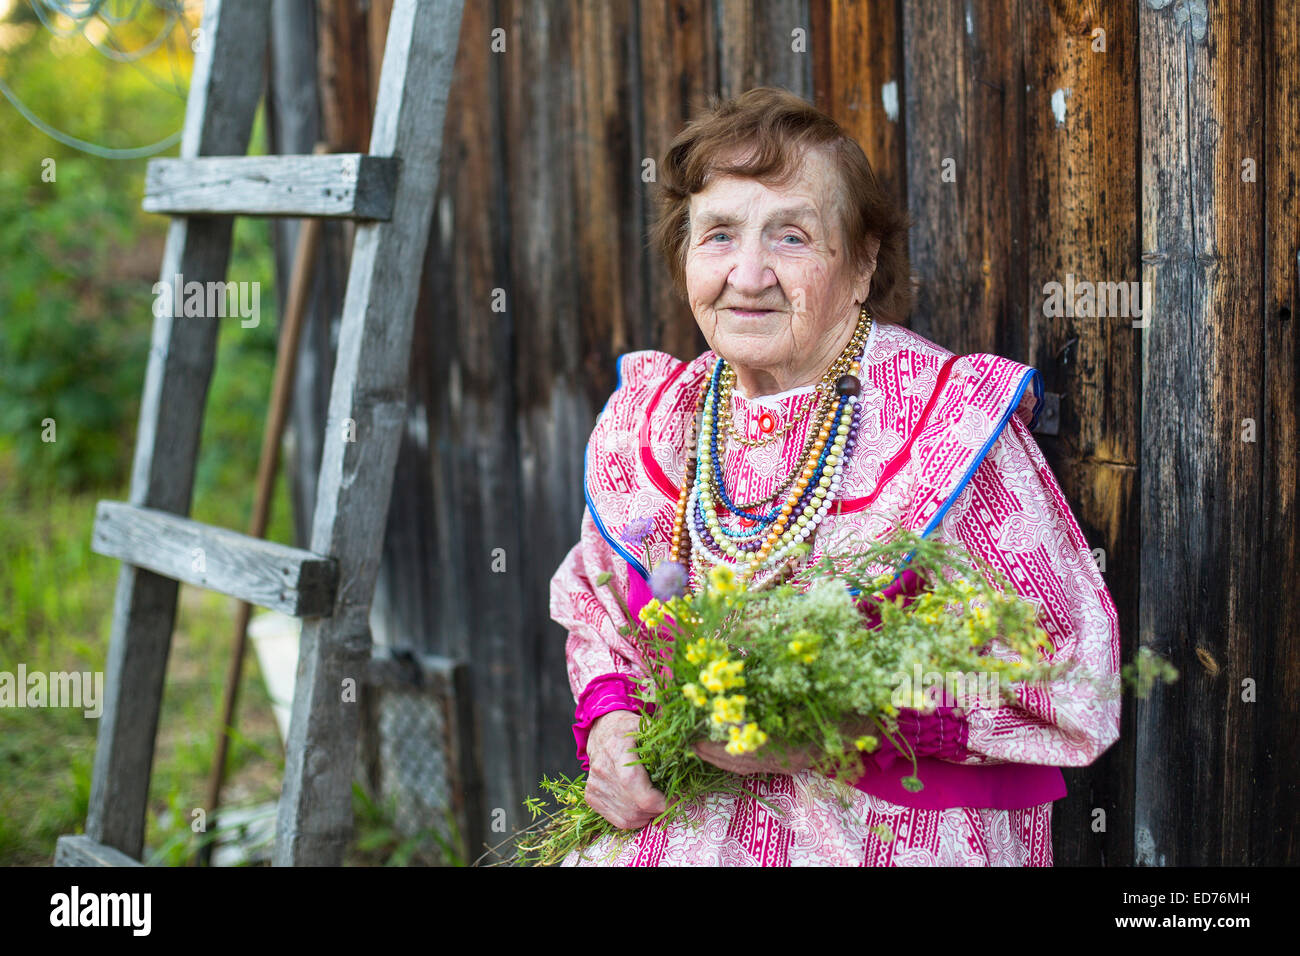 Old positive woman in the village, in a festive ethnic dress. Stock Photo